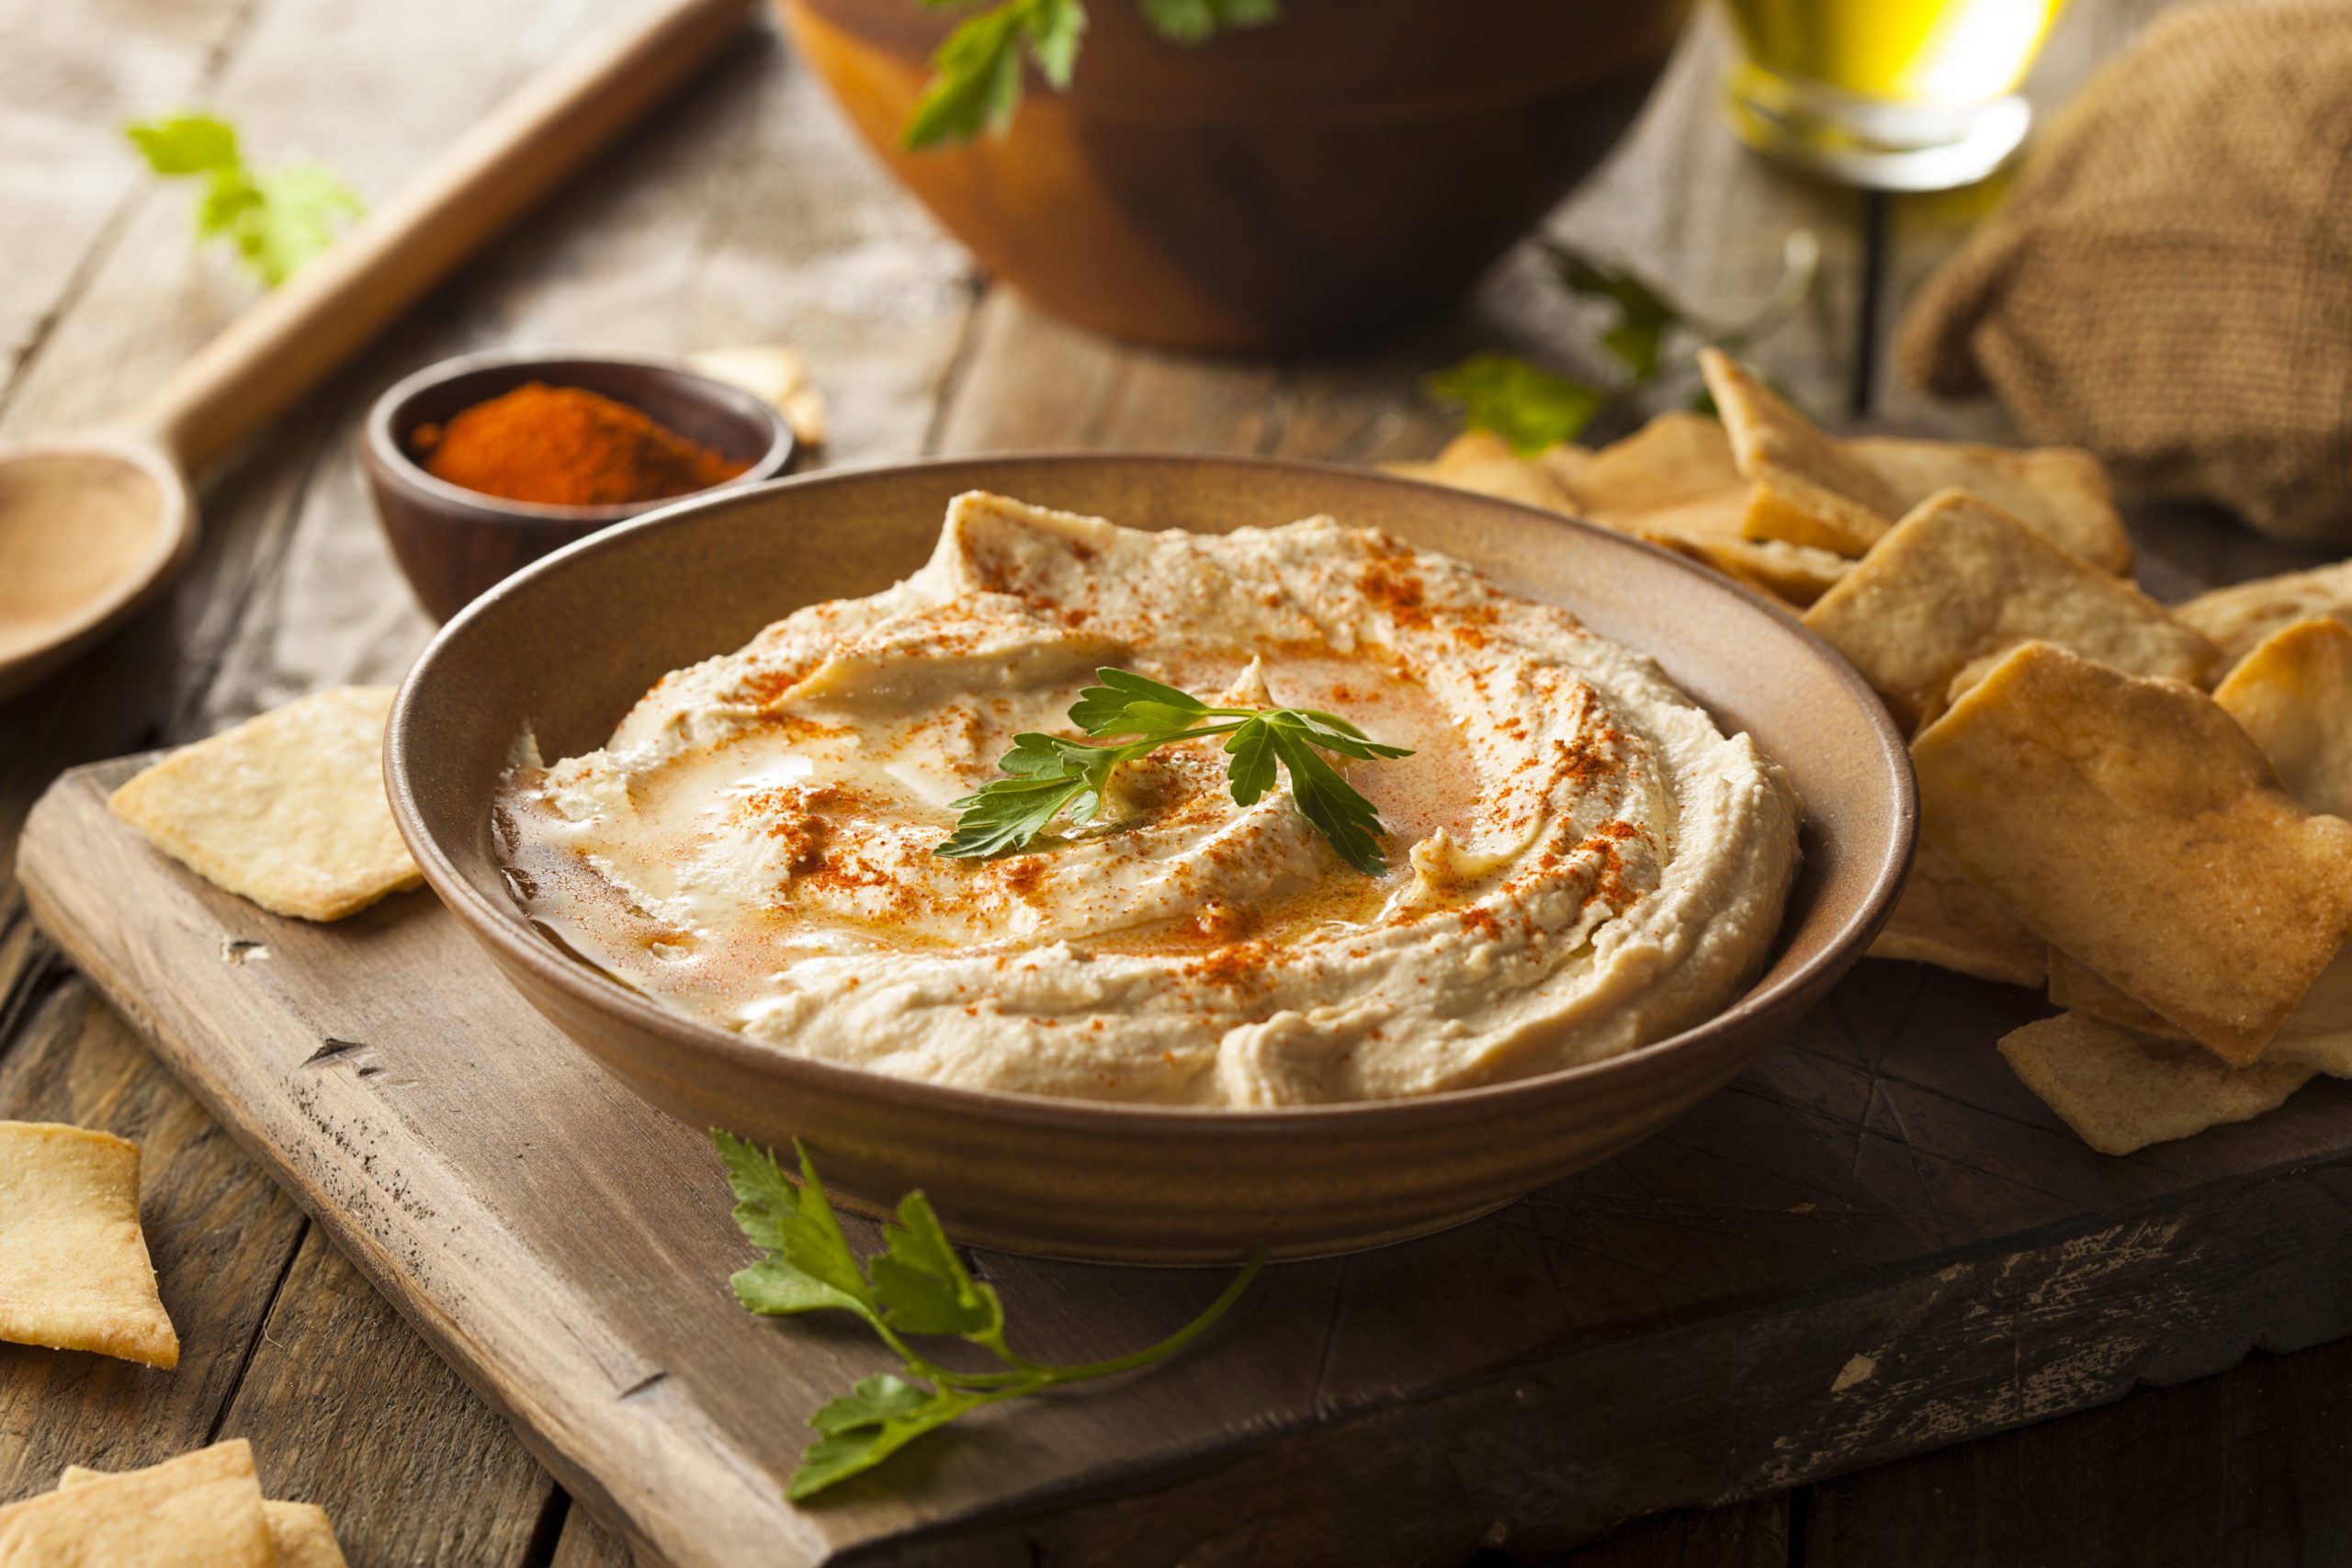 Make-Your-Own Hummus